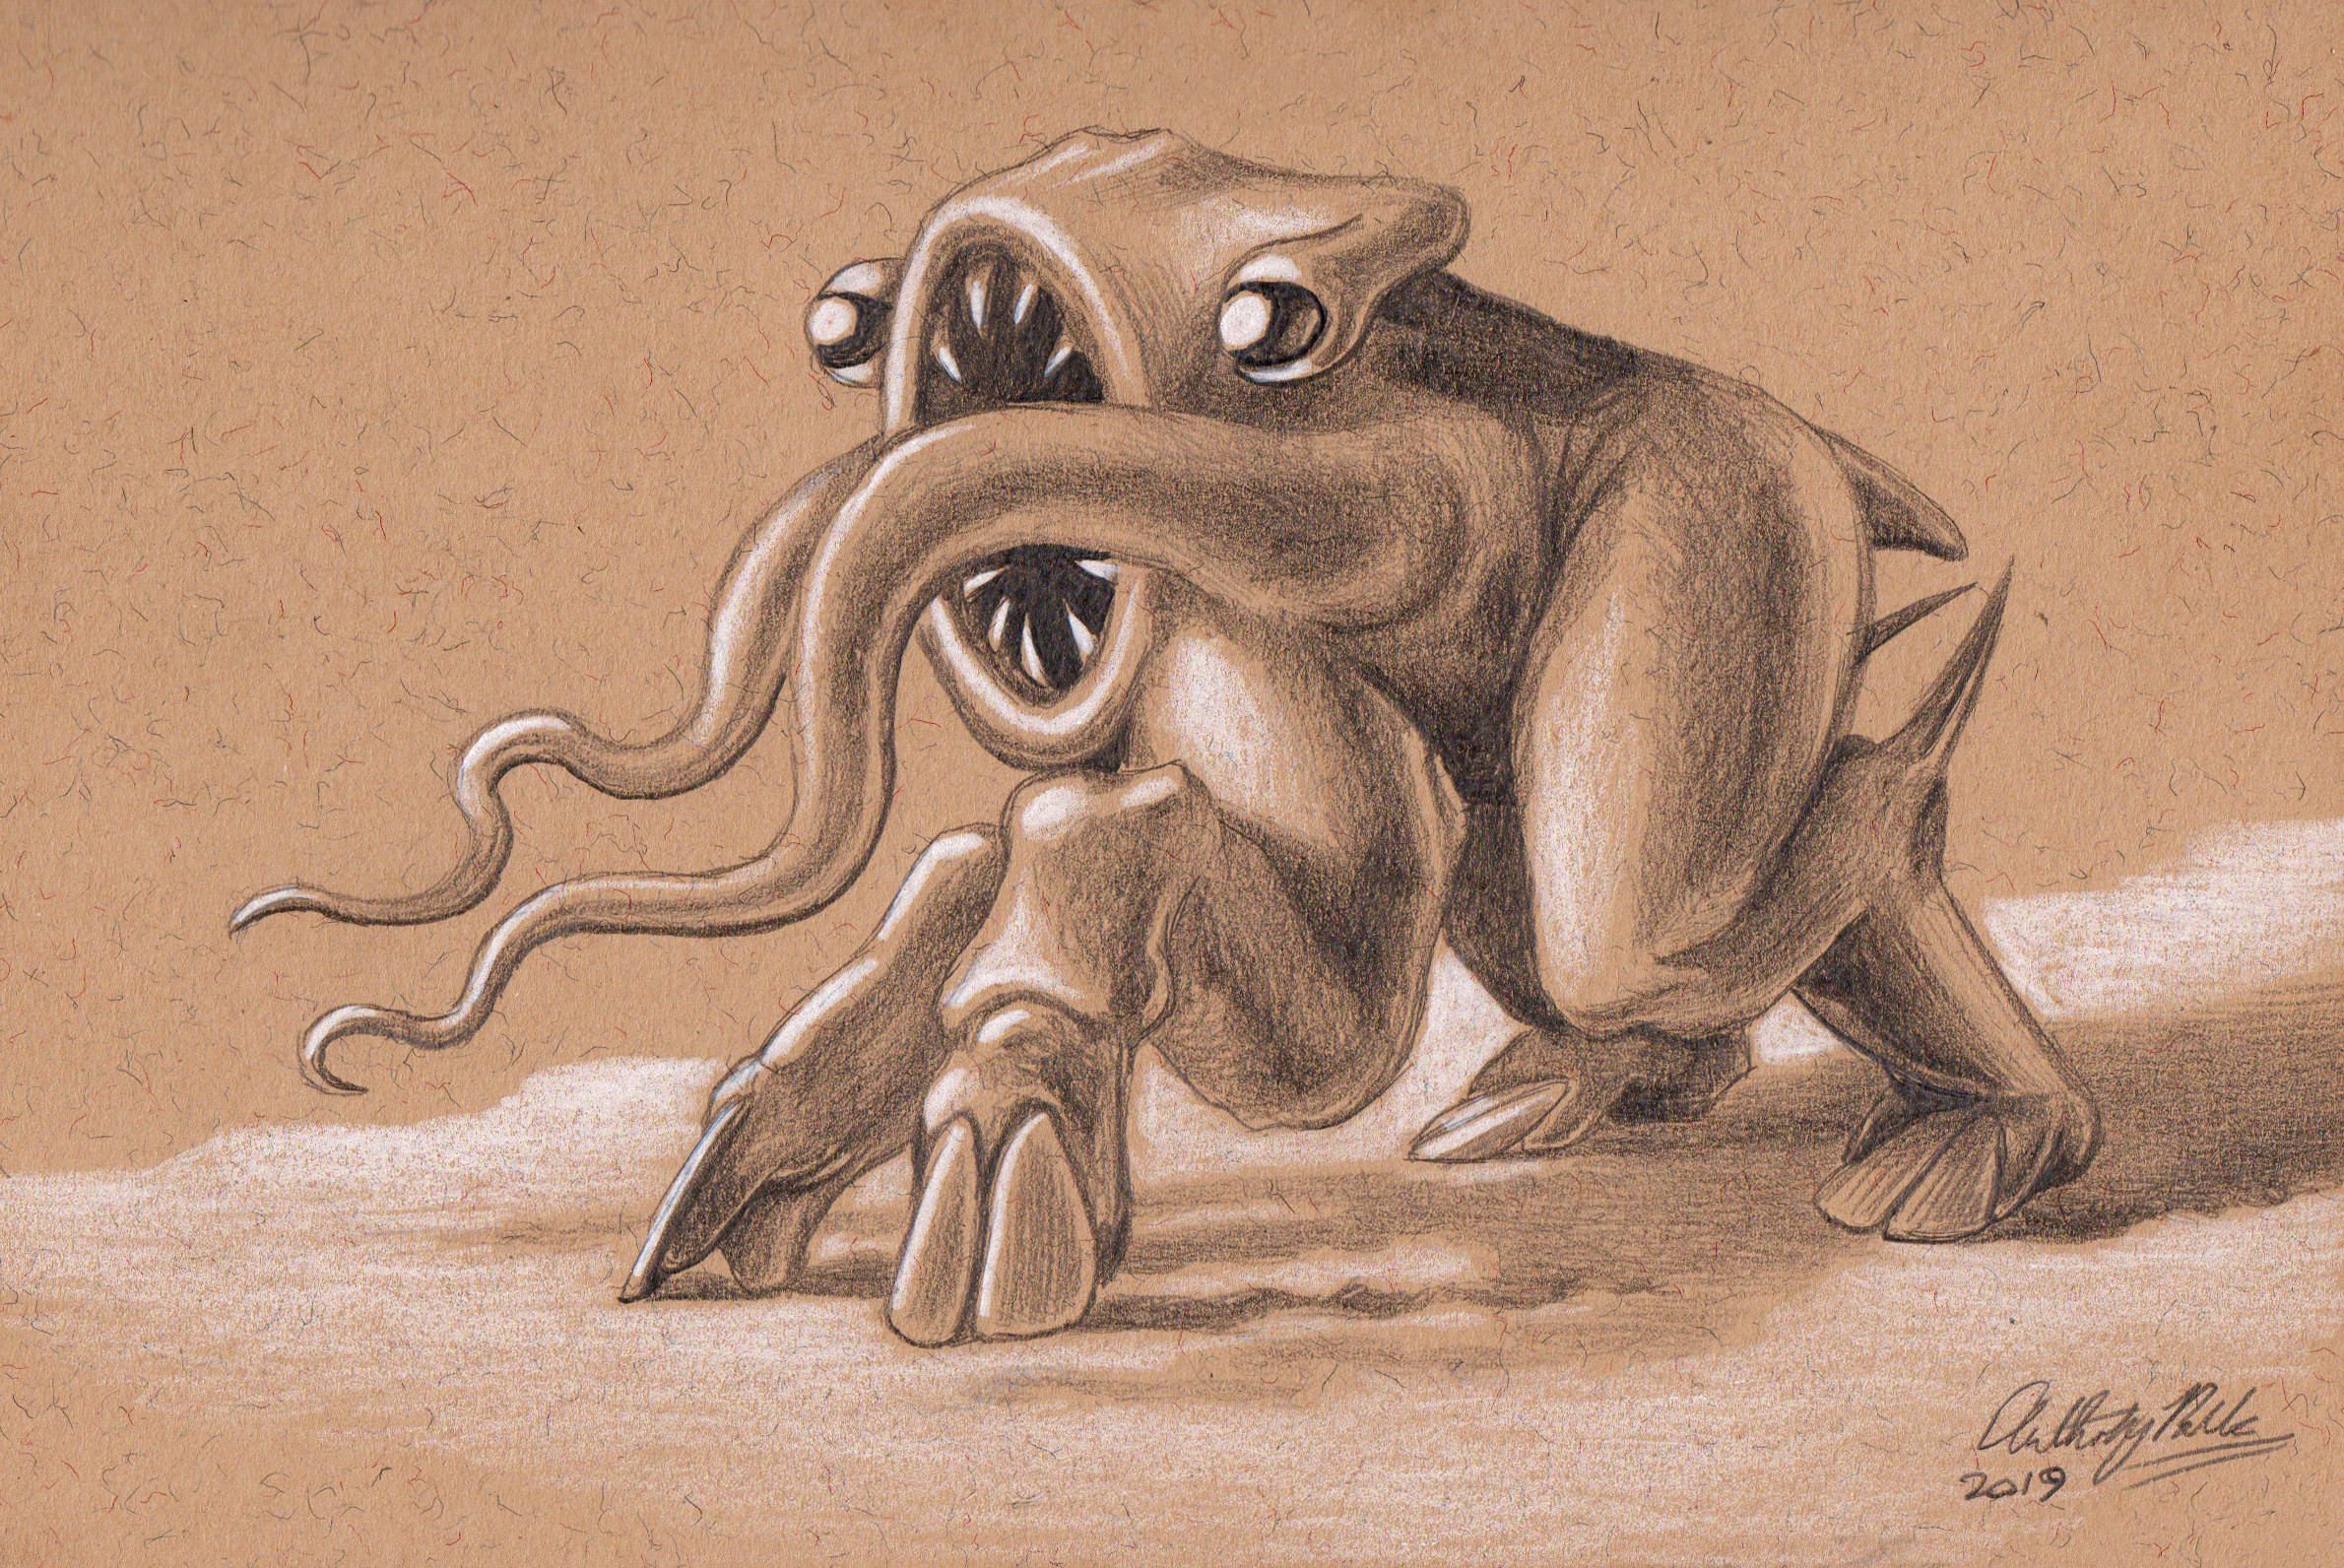 My Next Dog
Pencil on toned paper